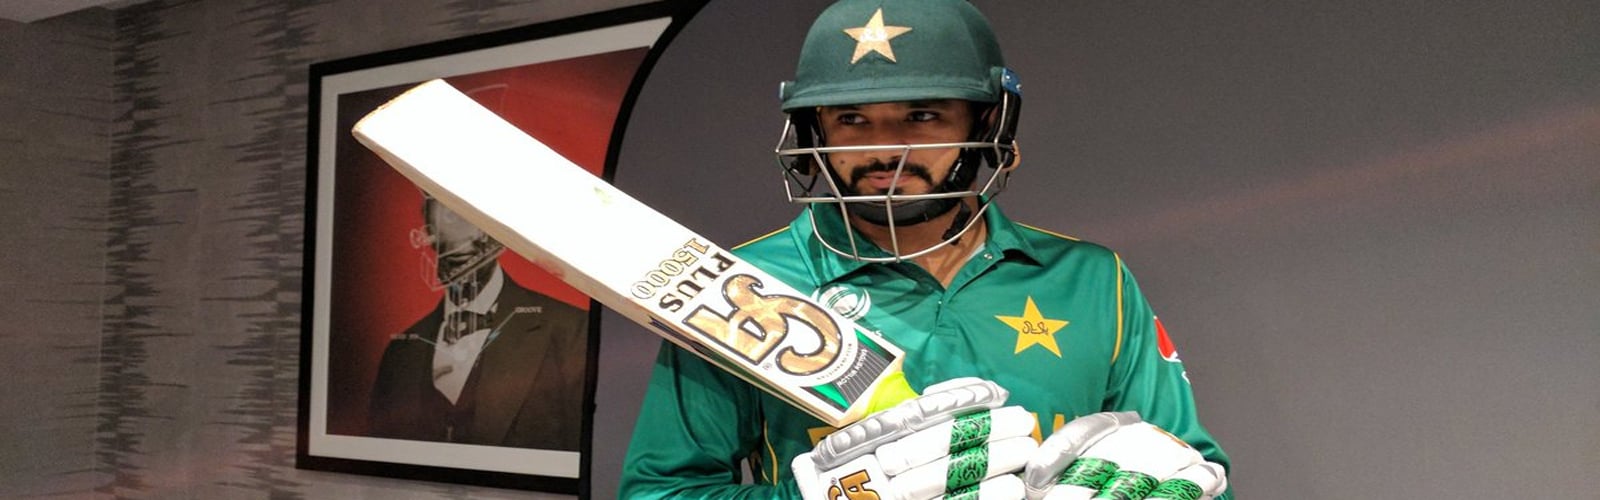 See photos of Pakistan Team bat signing and headshots in new kit